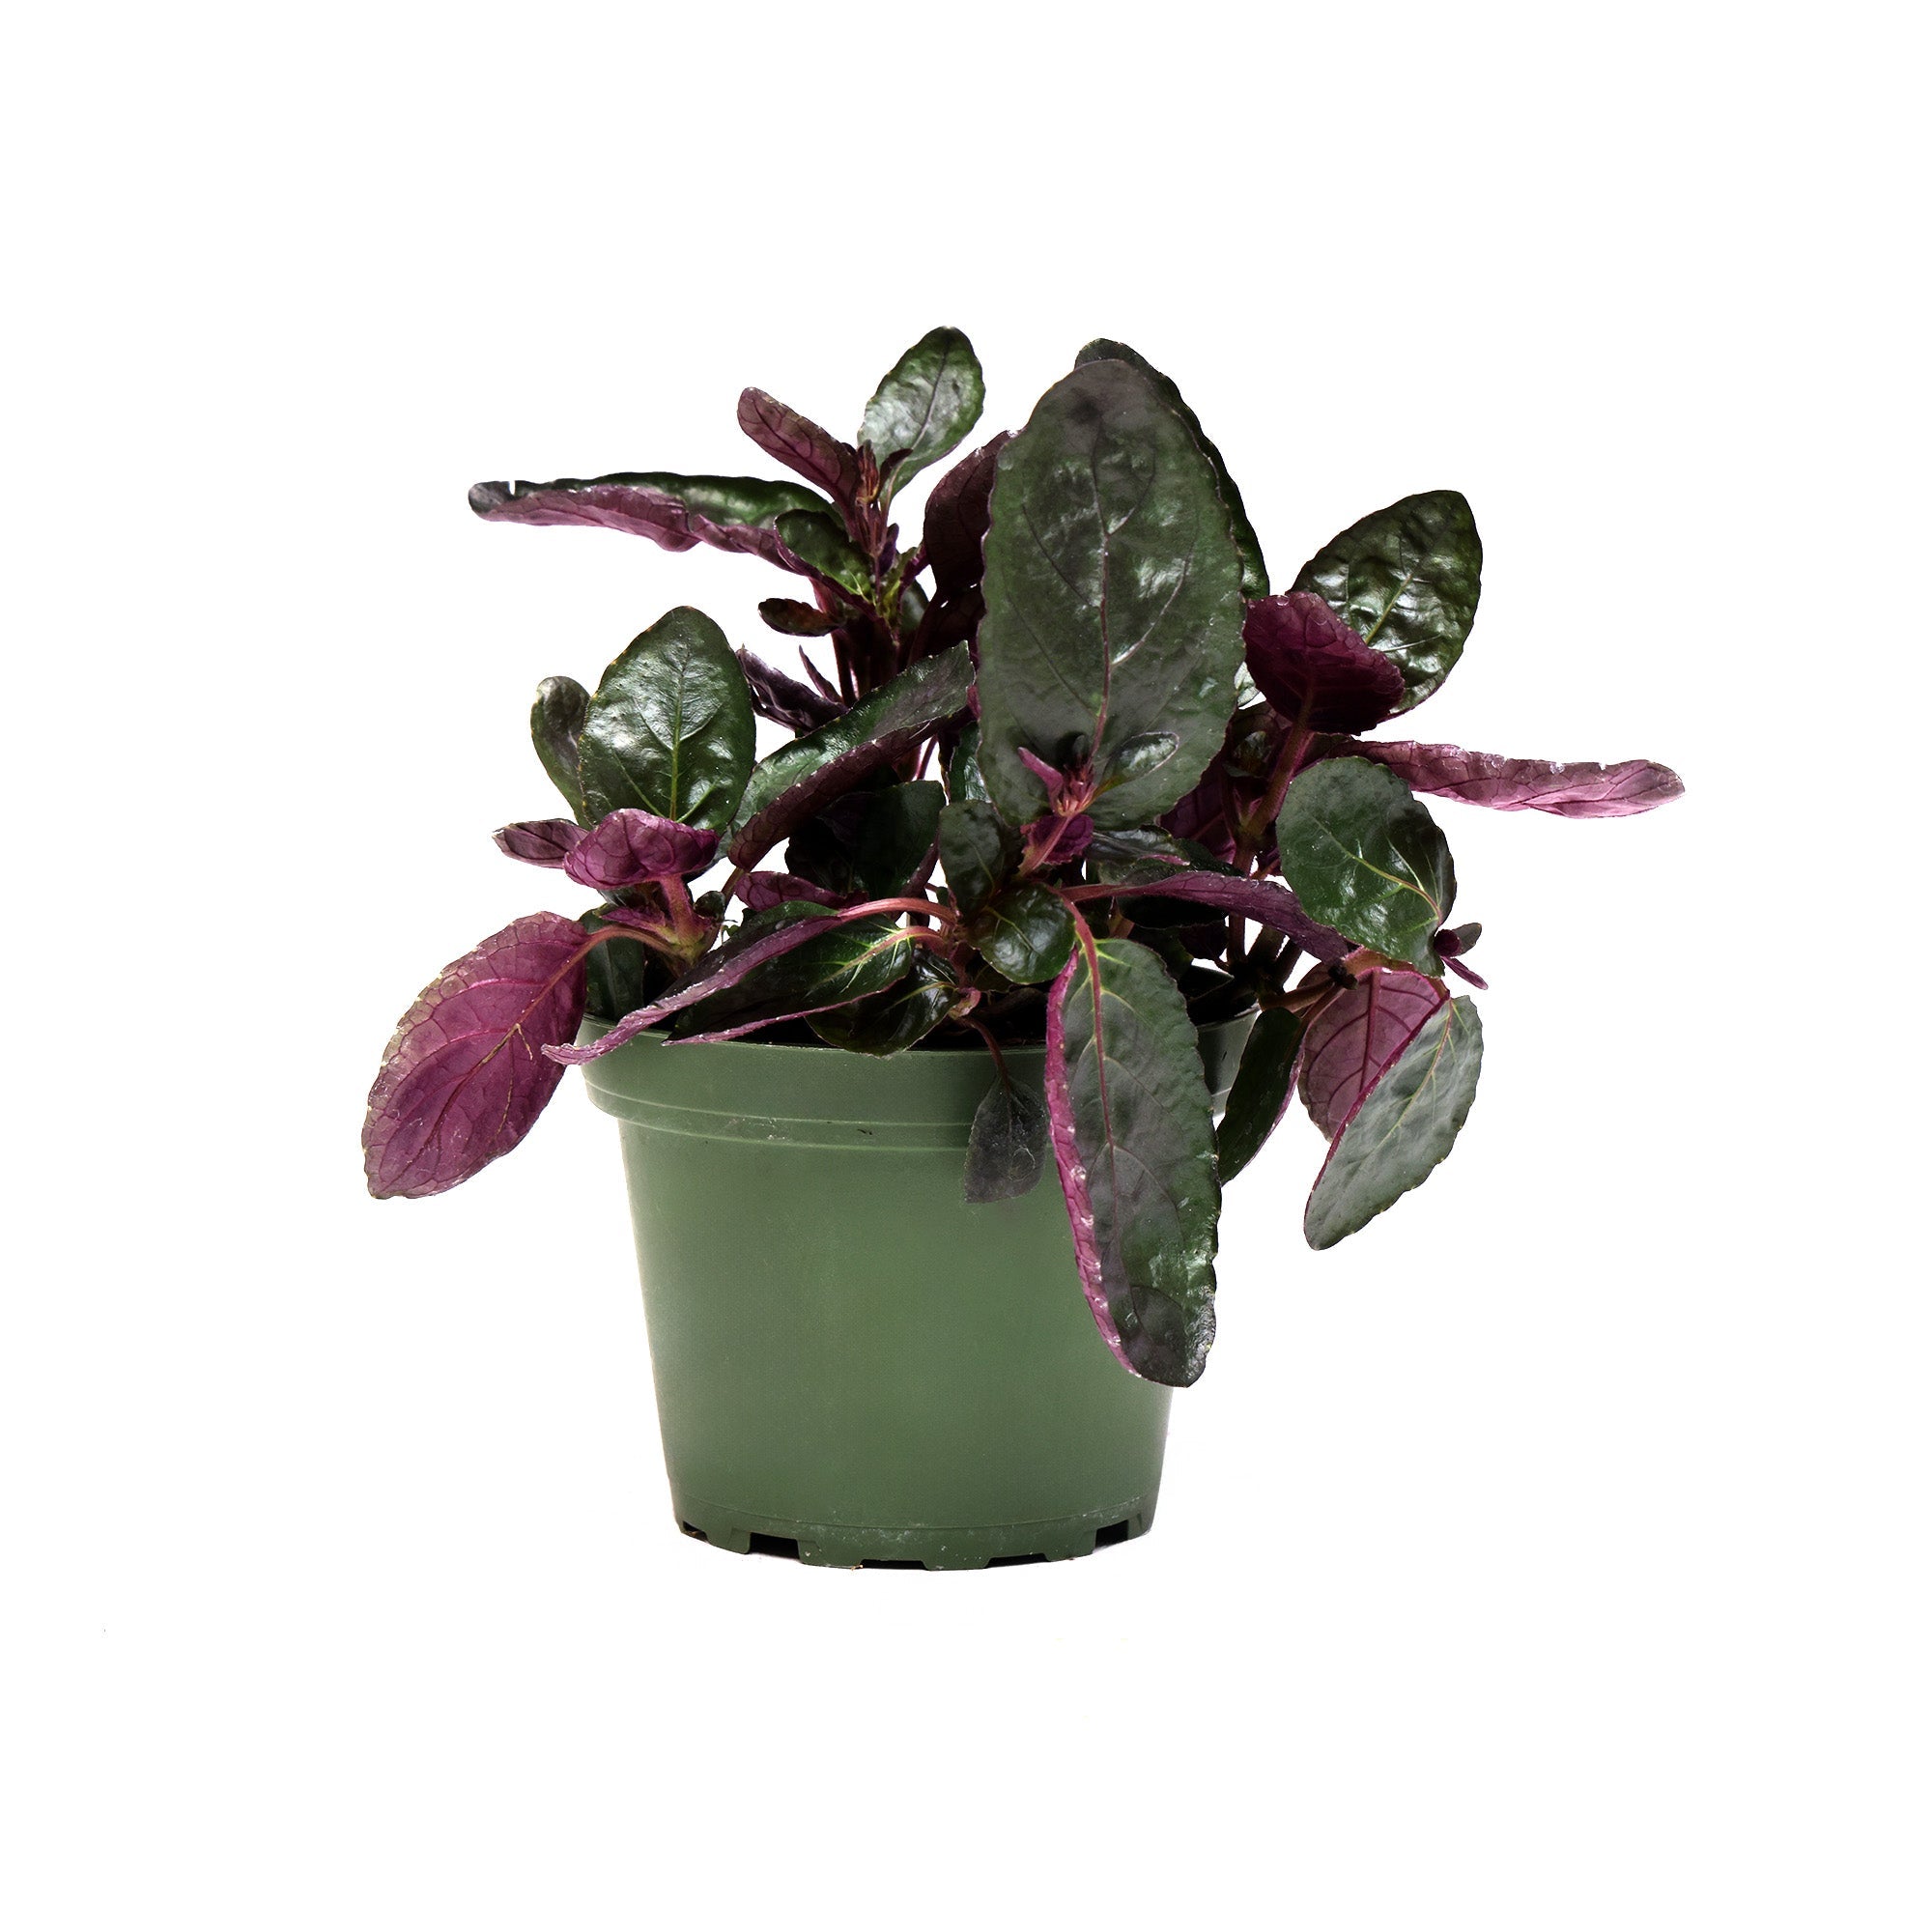 A Waffle Plant 4 Inches in a light green pot with dark green and purple leaves, isolated on a white background. The plant is showcasing vibrant, shiny oval-shaped leaves with purple undersides.